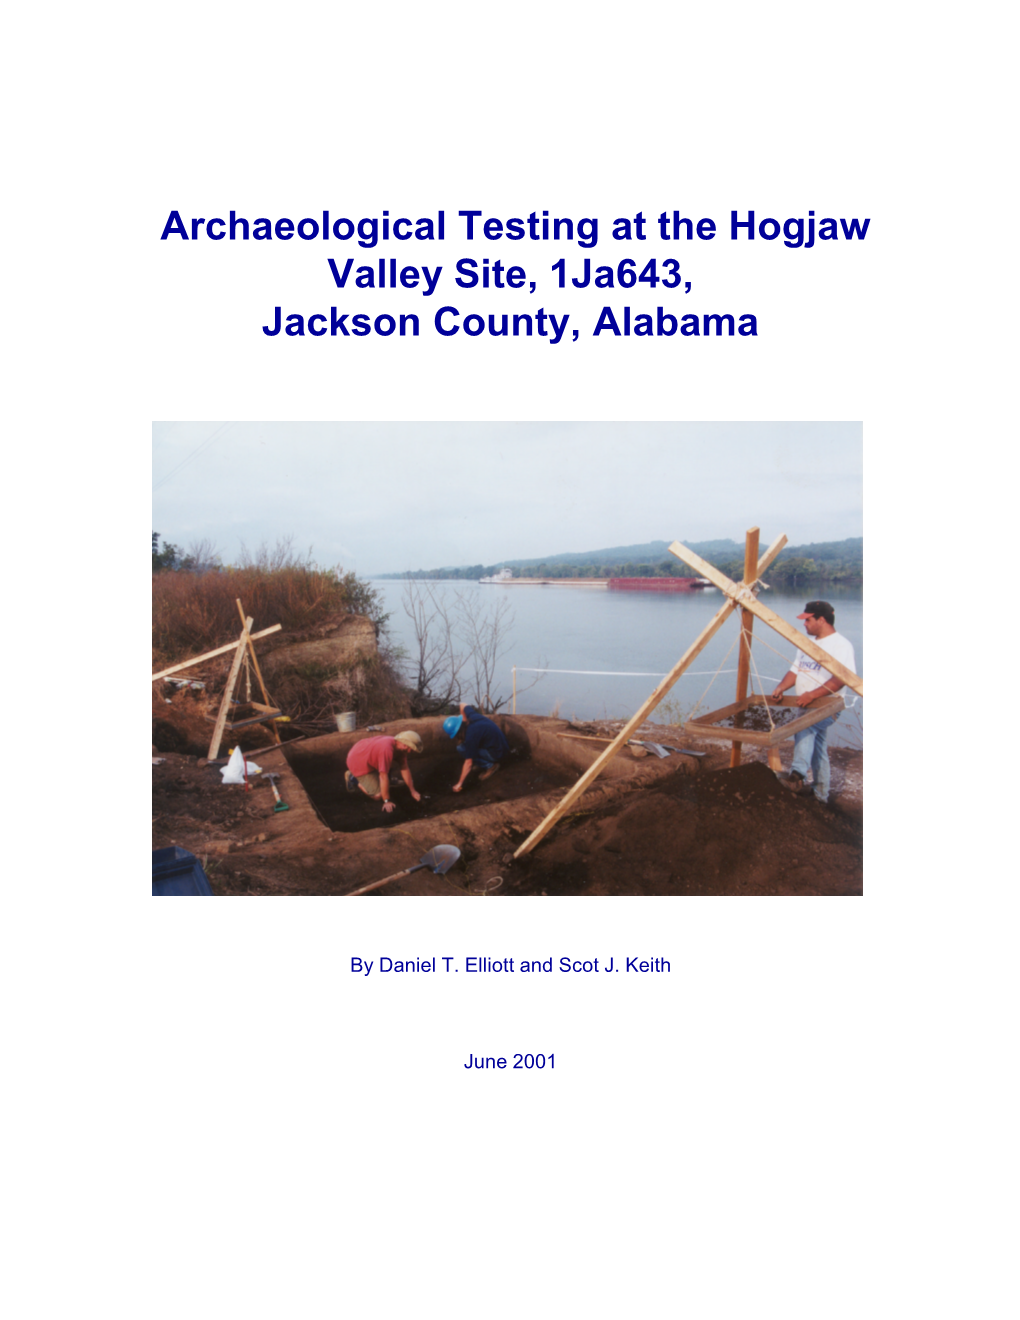 Archaeological Testing at the Hogjaw Valley Site, 1Ja643, Jackson County, Alabama